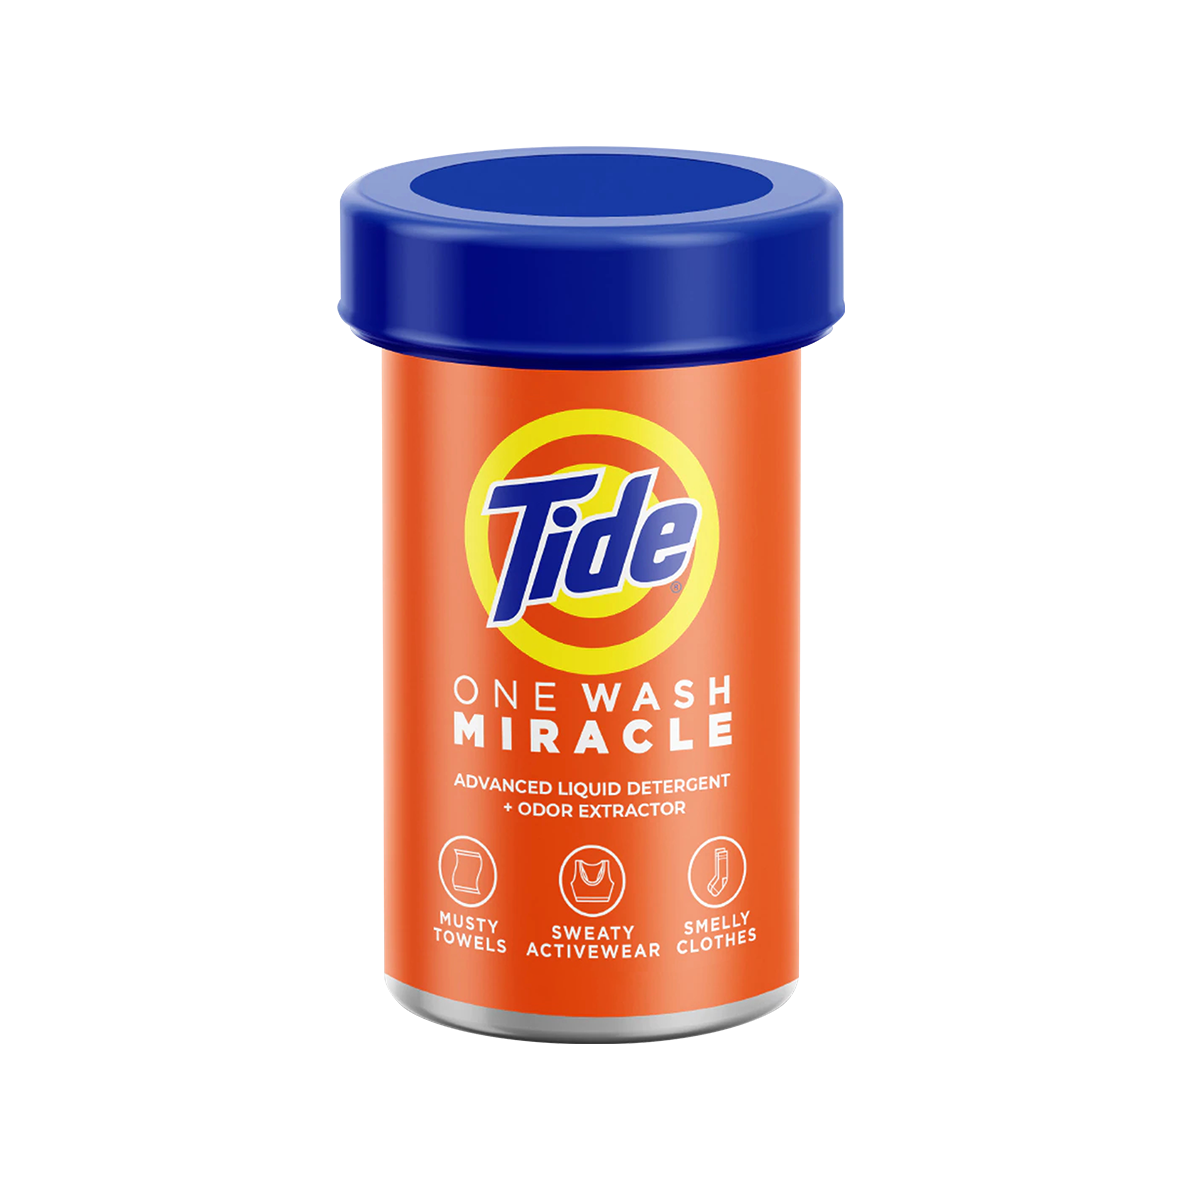 Tide One Wash Miracle - Powerful Deep-Cleaning Laundry Solution